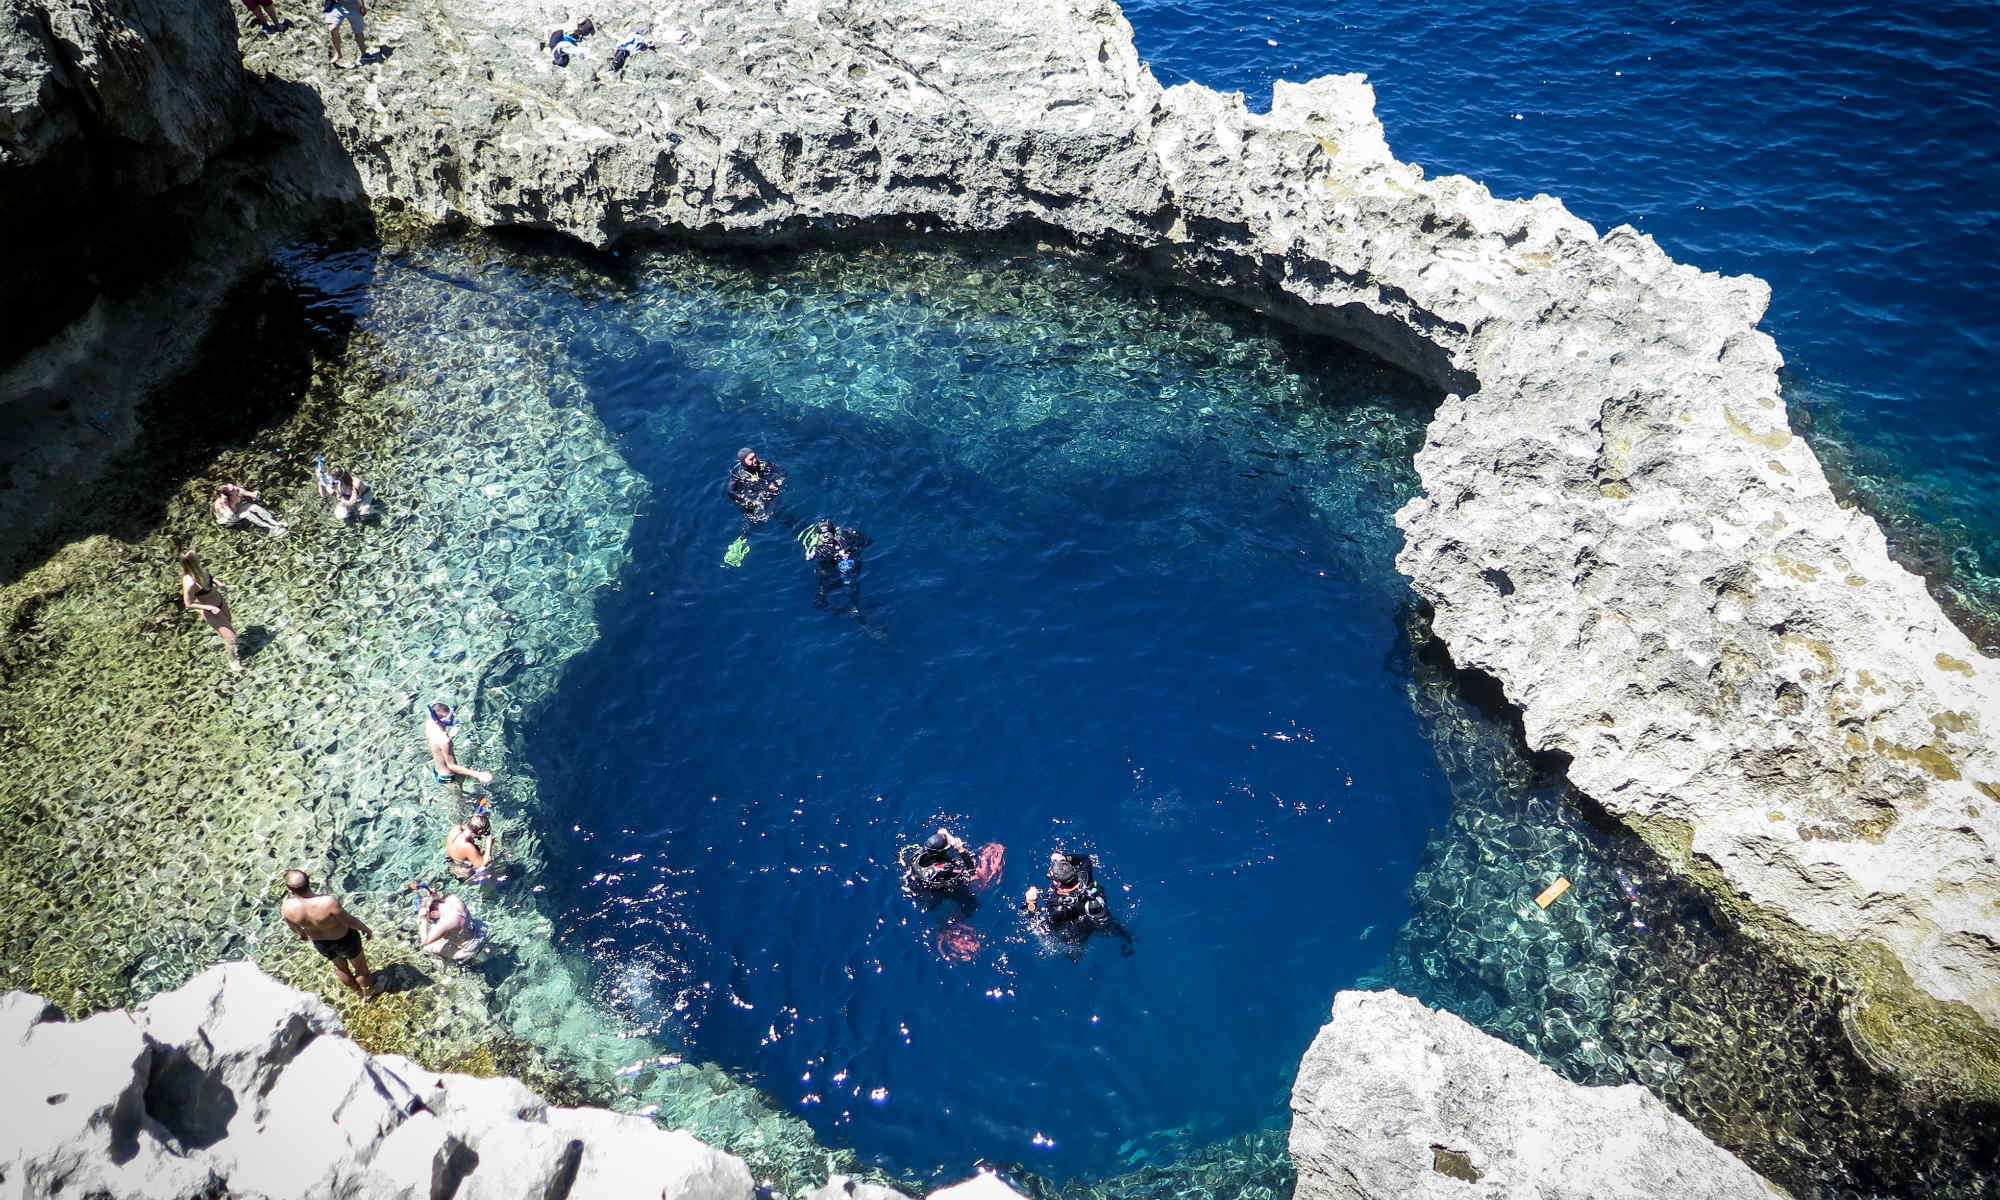 A couple of divers are preparing to dive down the blue hole, a dive site that shouldn’t be missed when scuba diving in Malta.